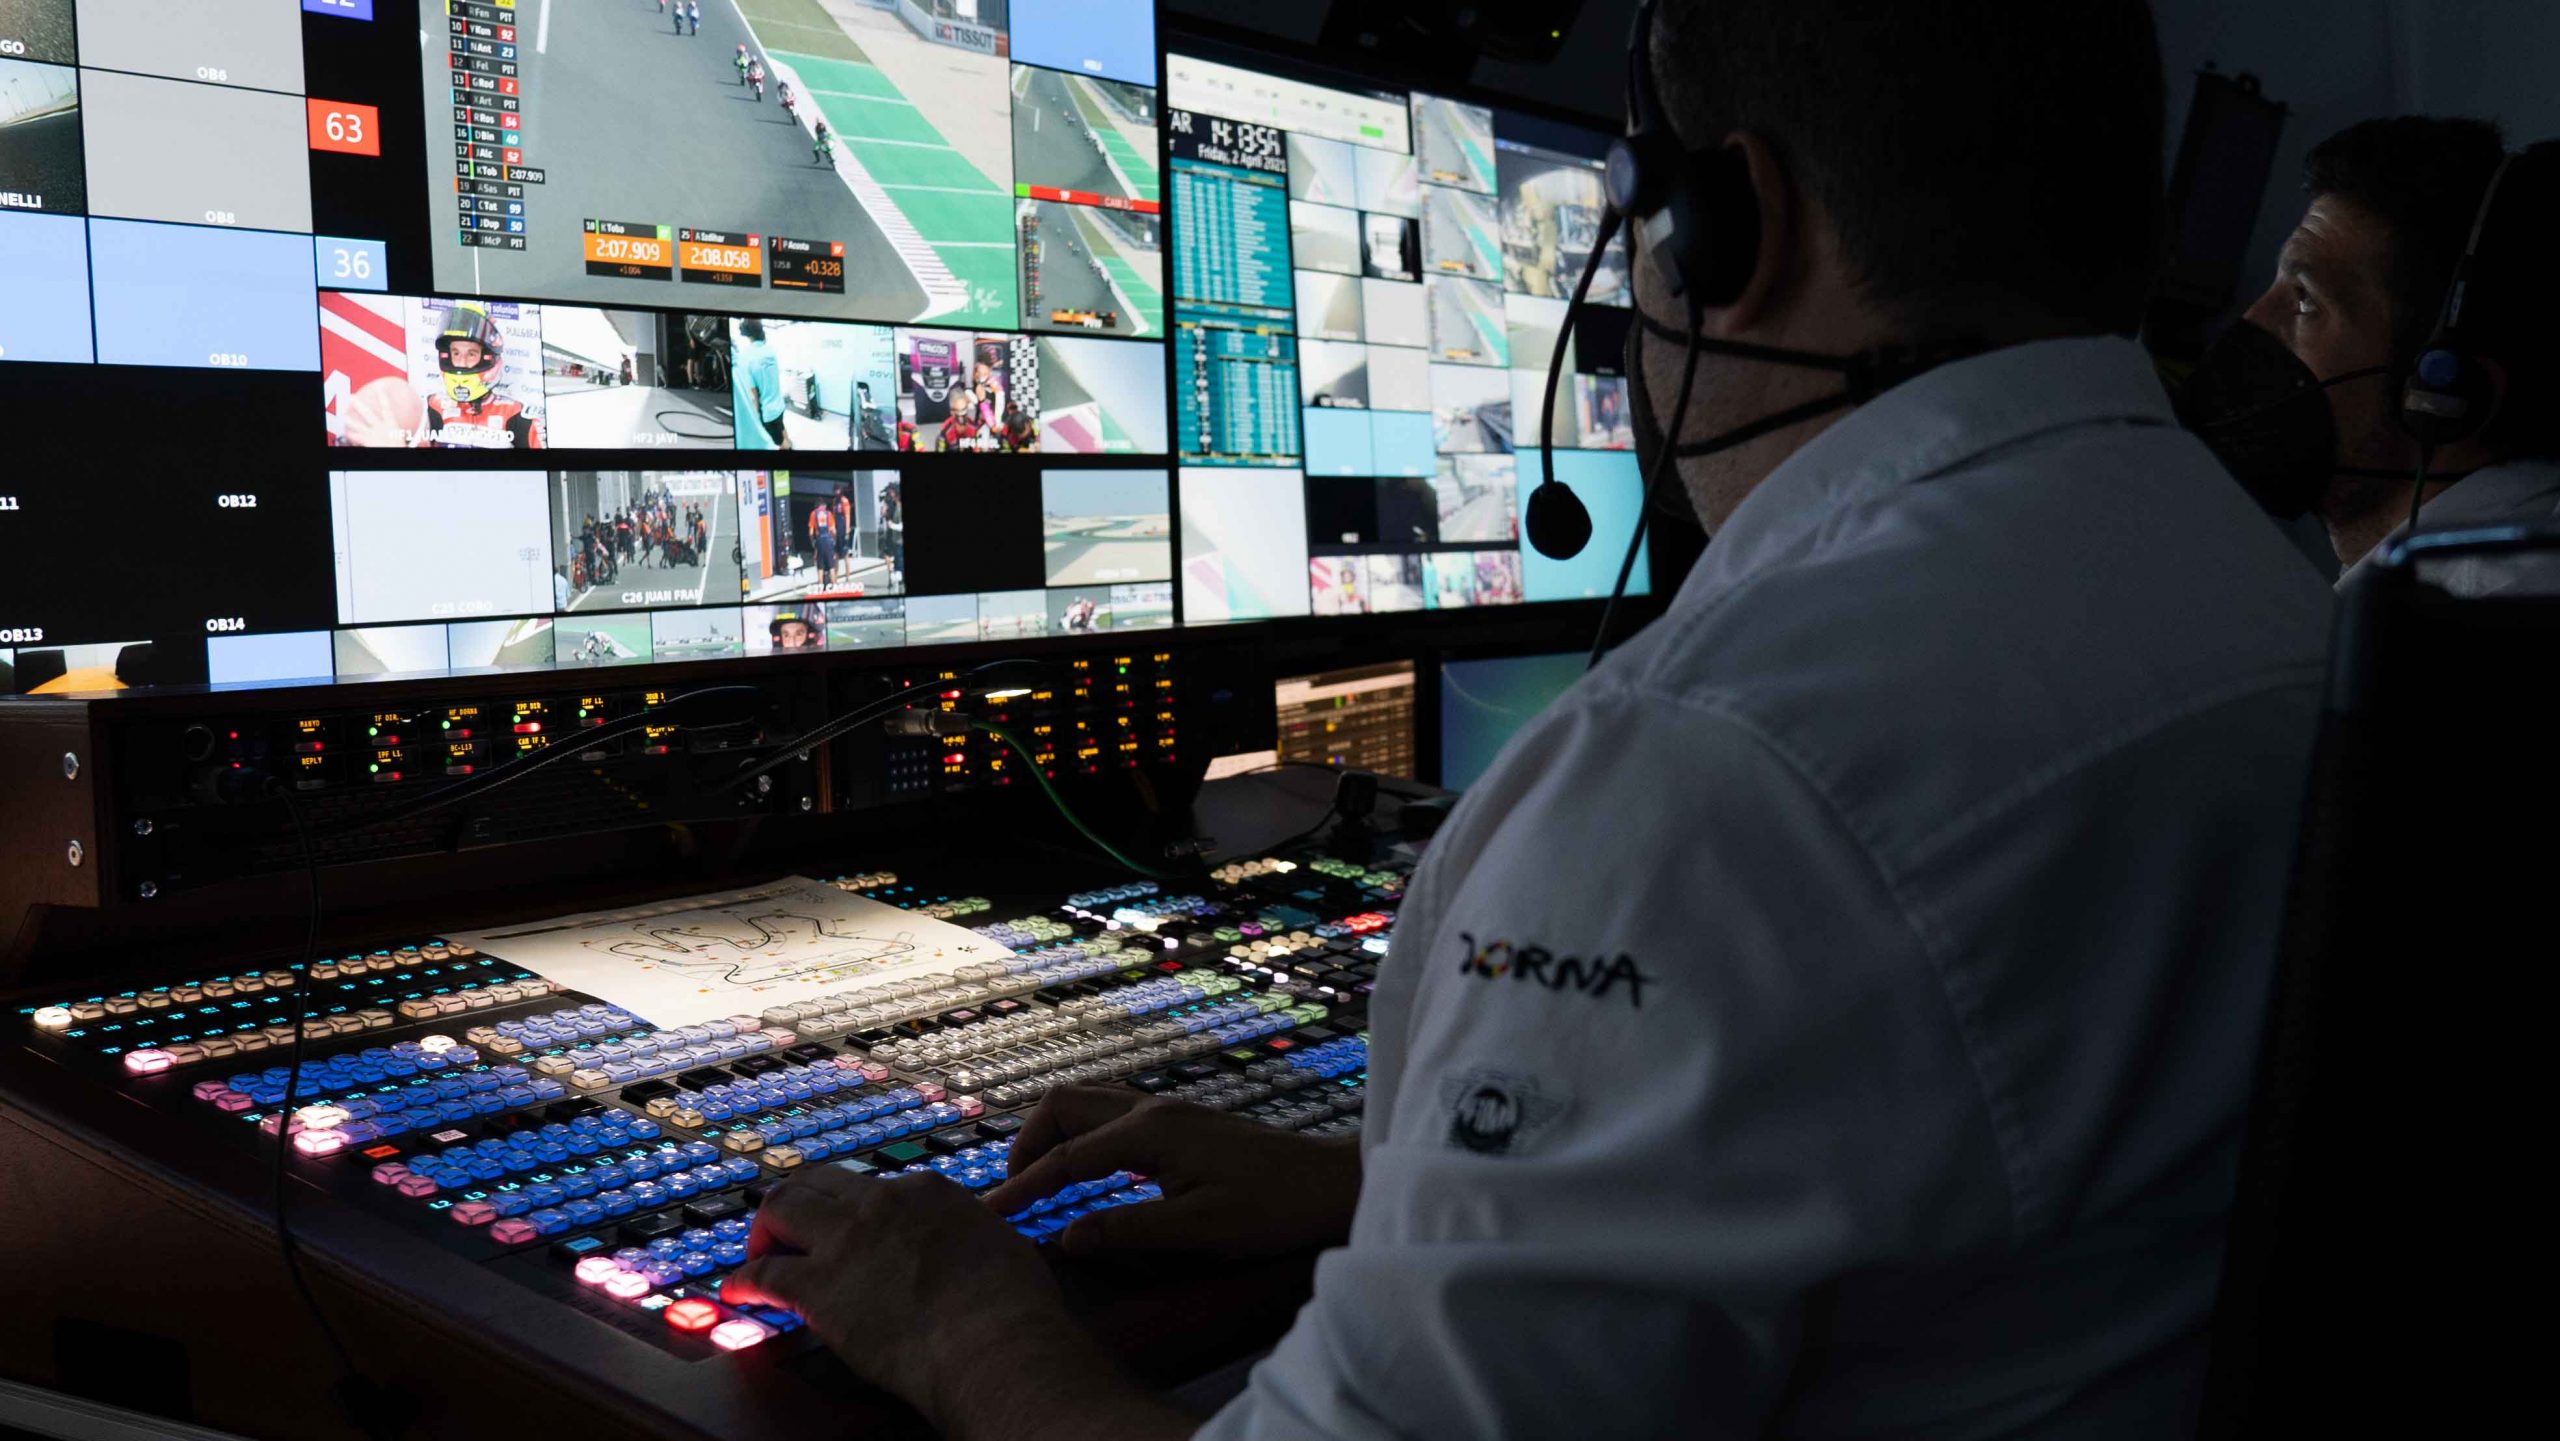 Grass Valley Kahuna 6400 Switcher Provides Production Backbone of DORNA Sports Coverage of 2021 Grand Prix Motorcycling